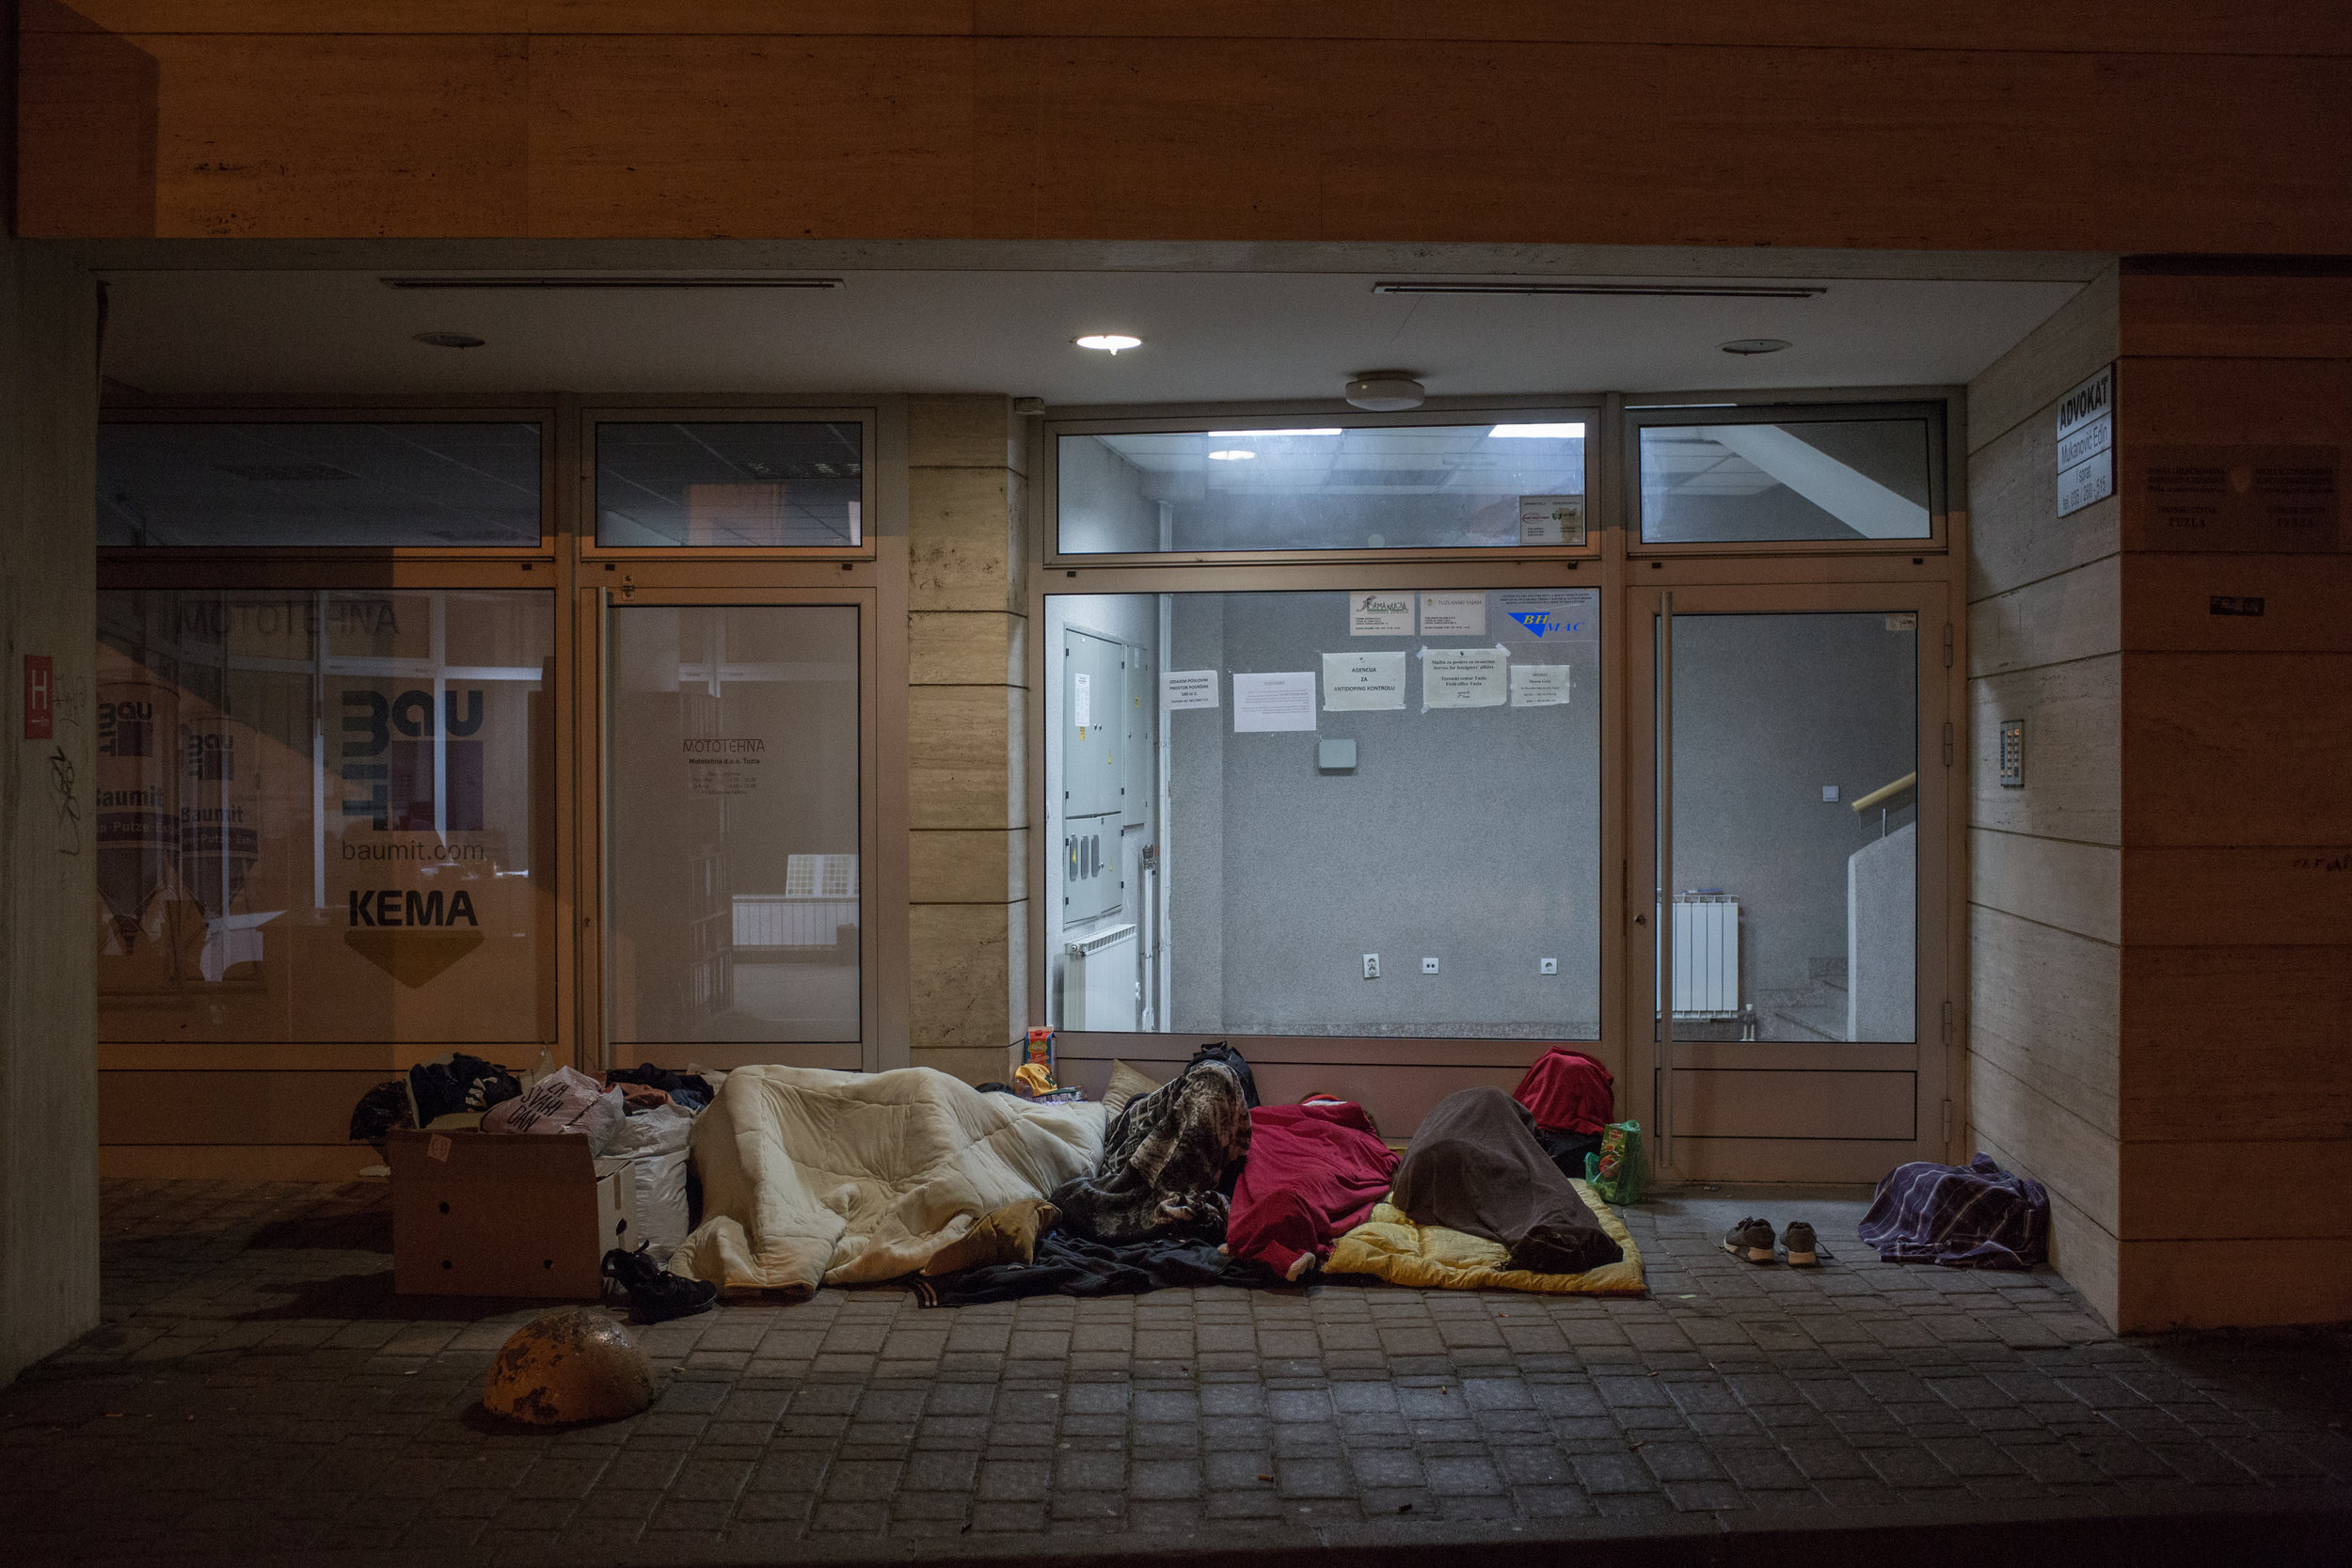  Tuzla, the first town in BiH migrants, arriving from Serbia enter. In the photo, they spend the night in front of the registration center. 